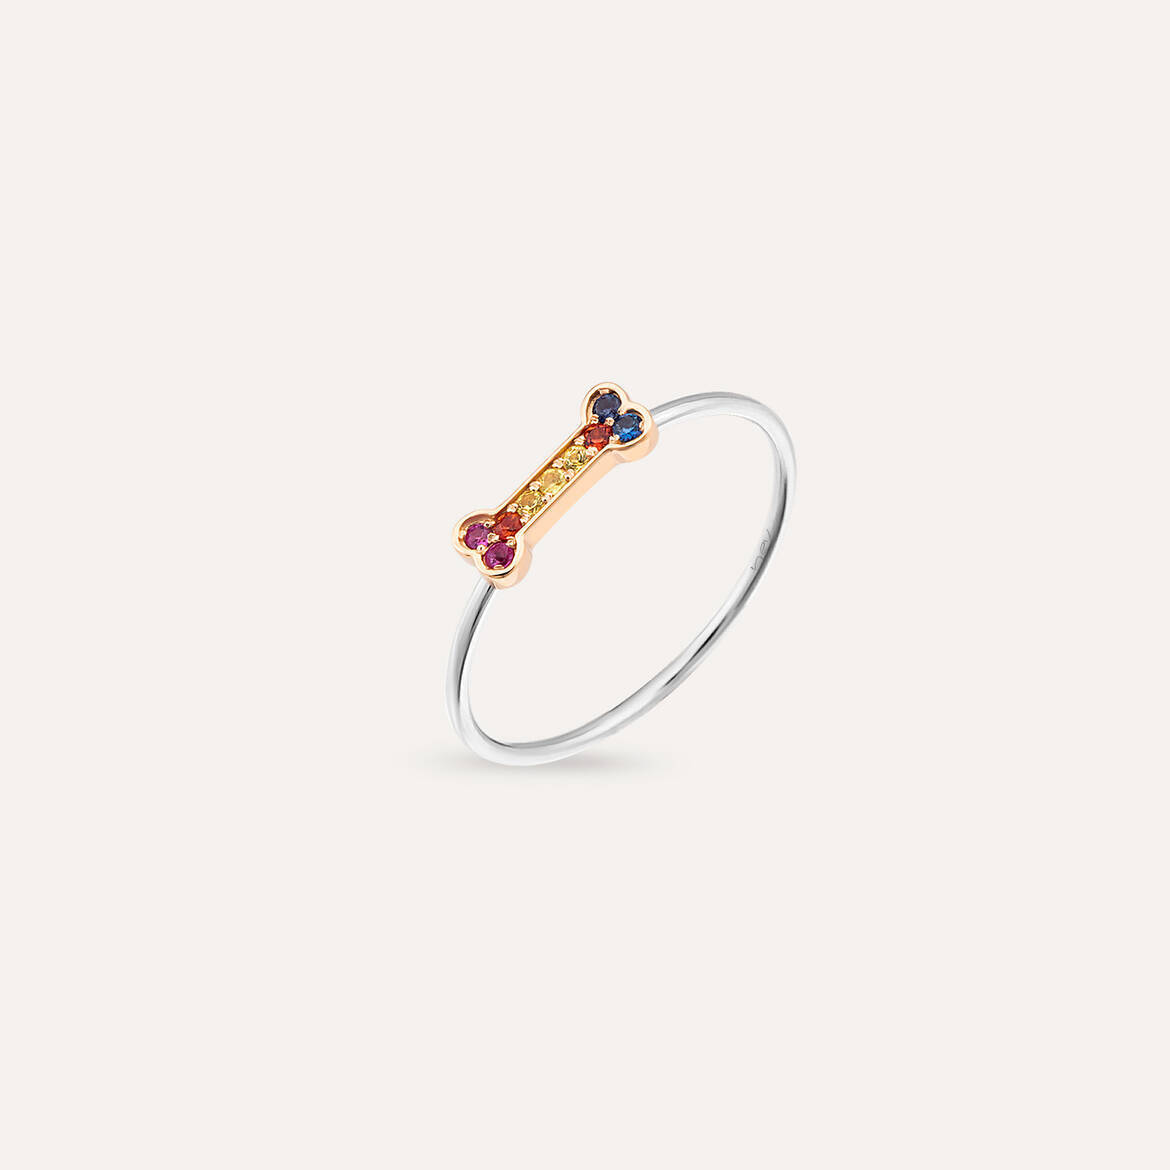 Droopy 0.08 CT Multicolor Sapphire Ring